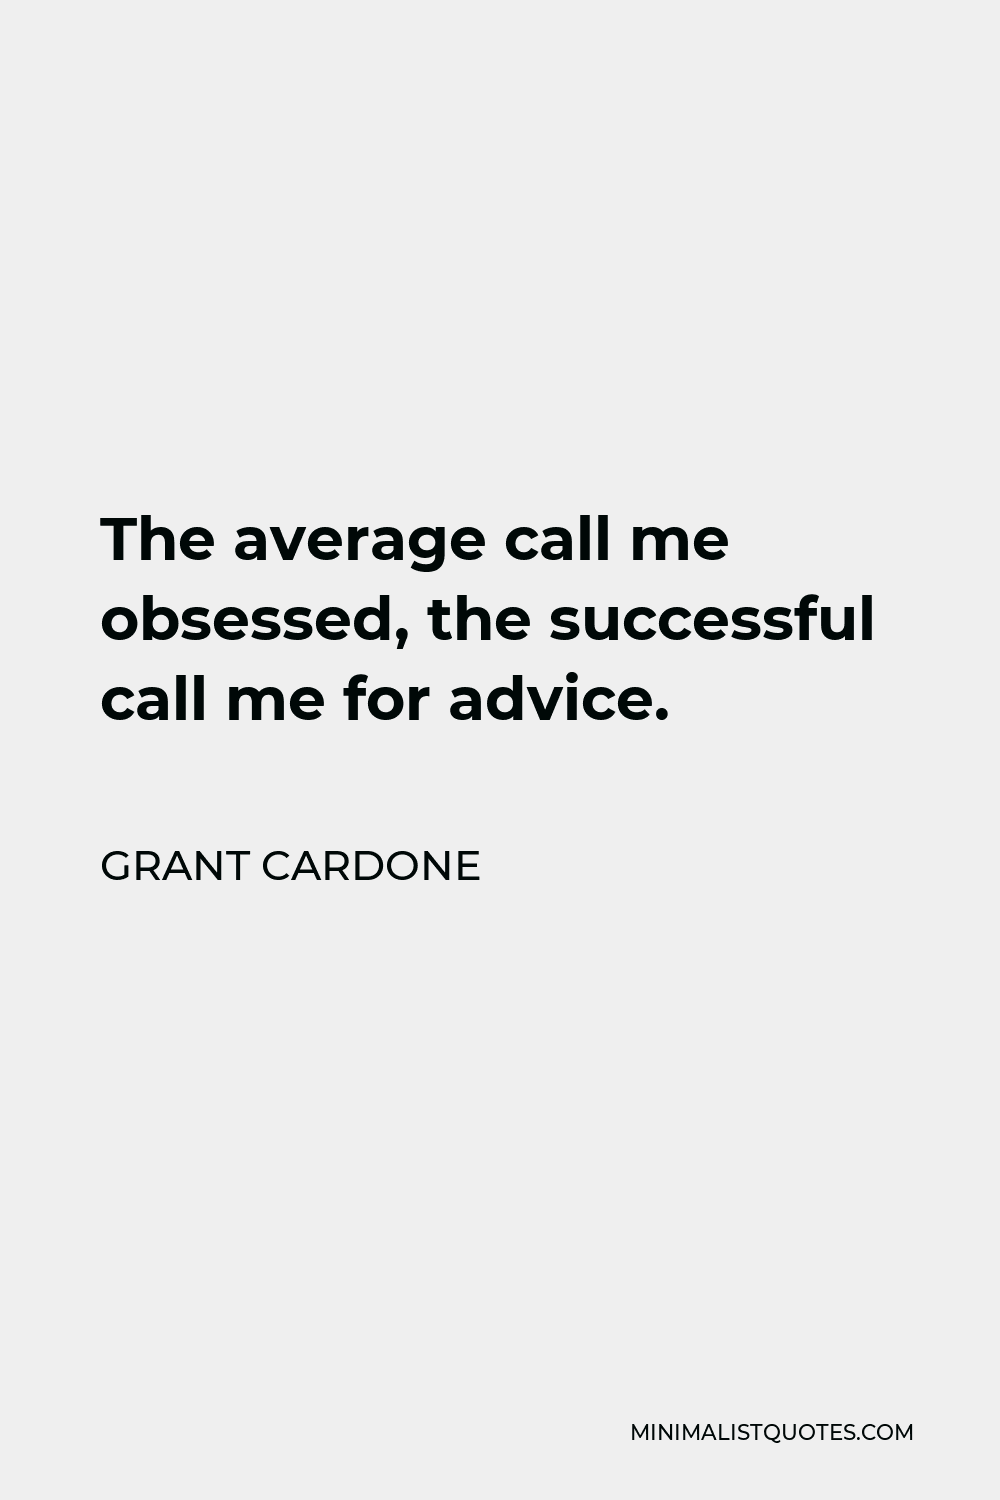 Grant Cardone Quote - The average call me obsessed, the successful call me for advice.